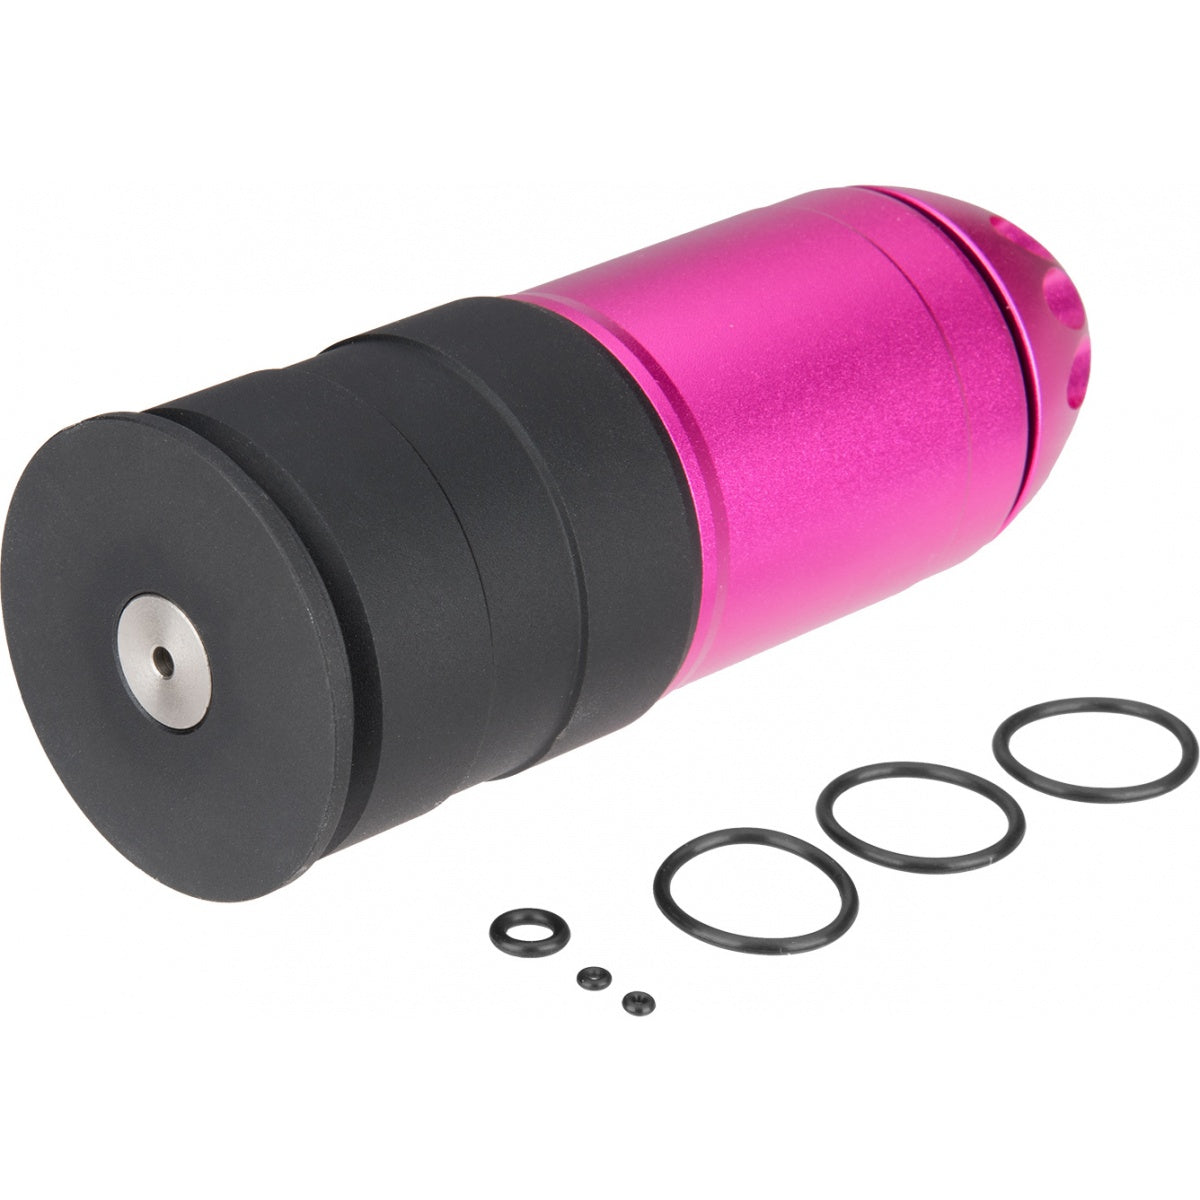 Sentinel Gears 120rd Grenade Shell for 40mm Airsoft Grenade Launchers - BLACK / PINK - ssairsoft